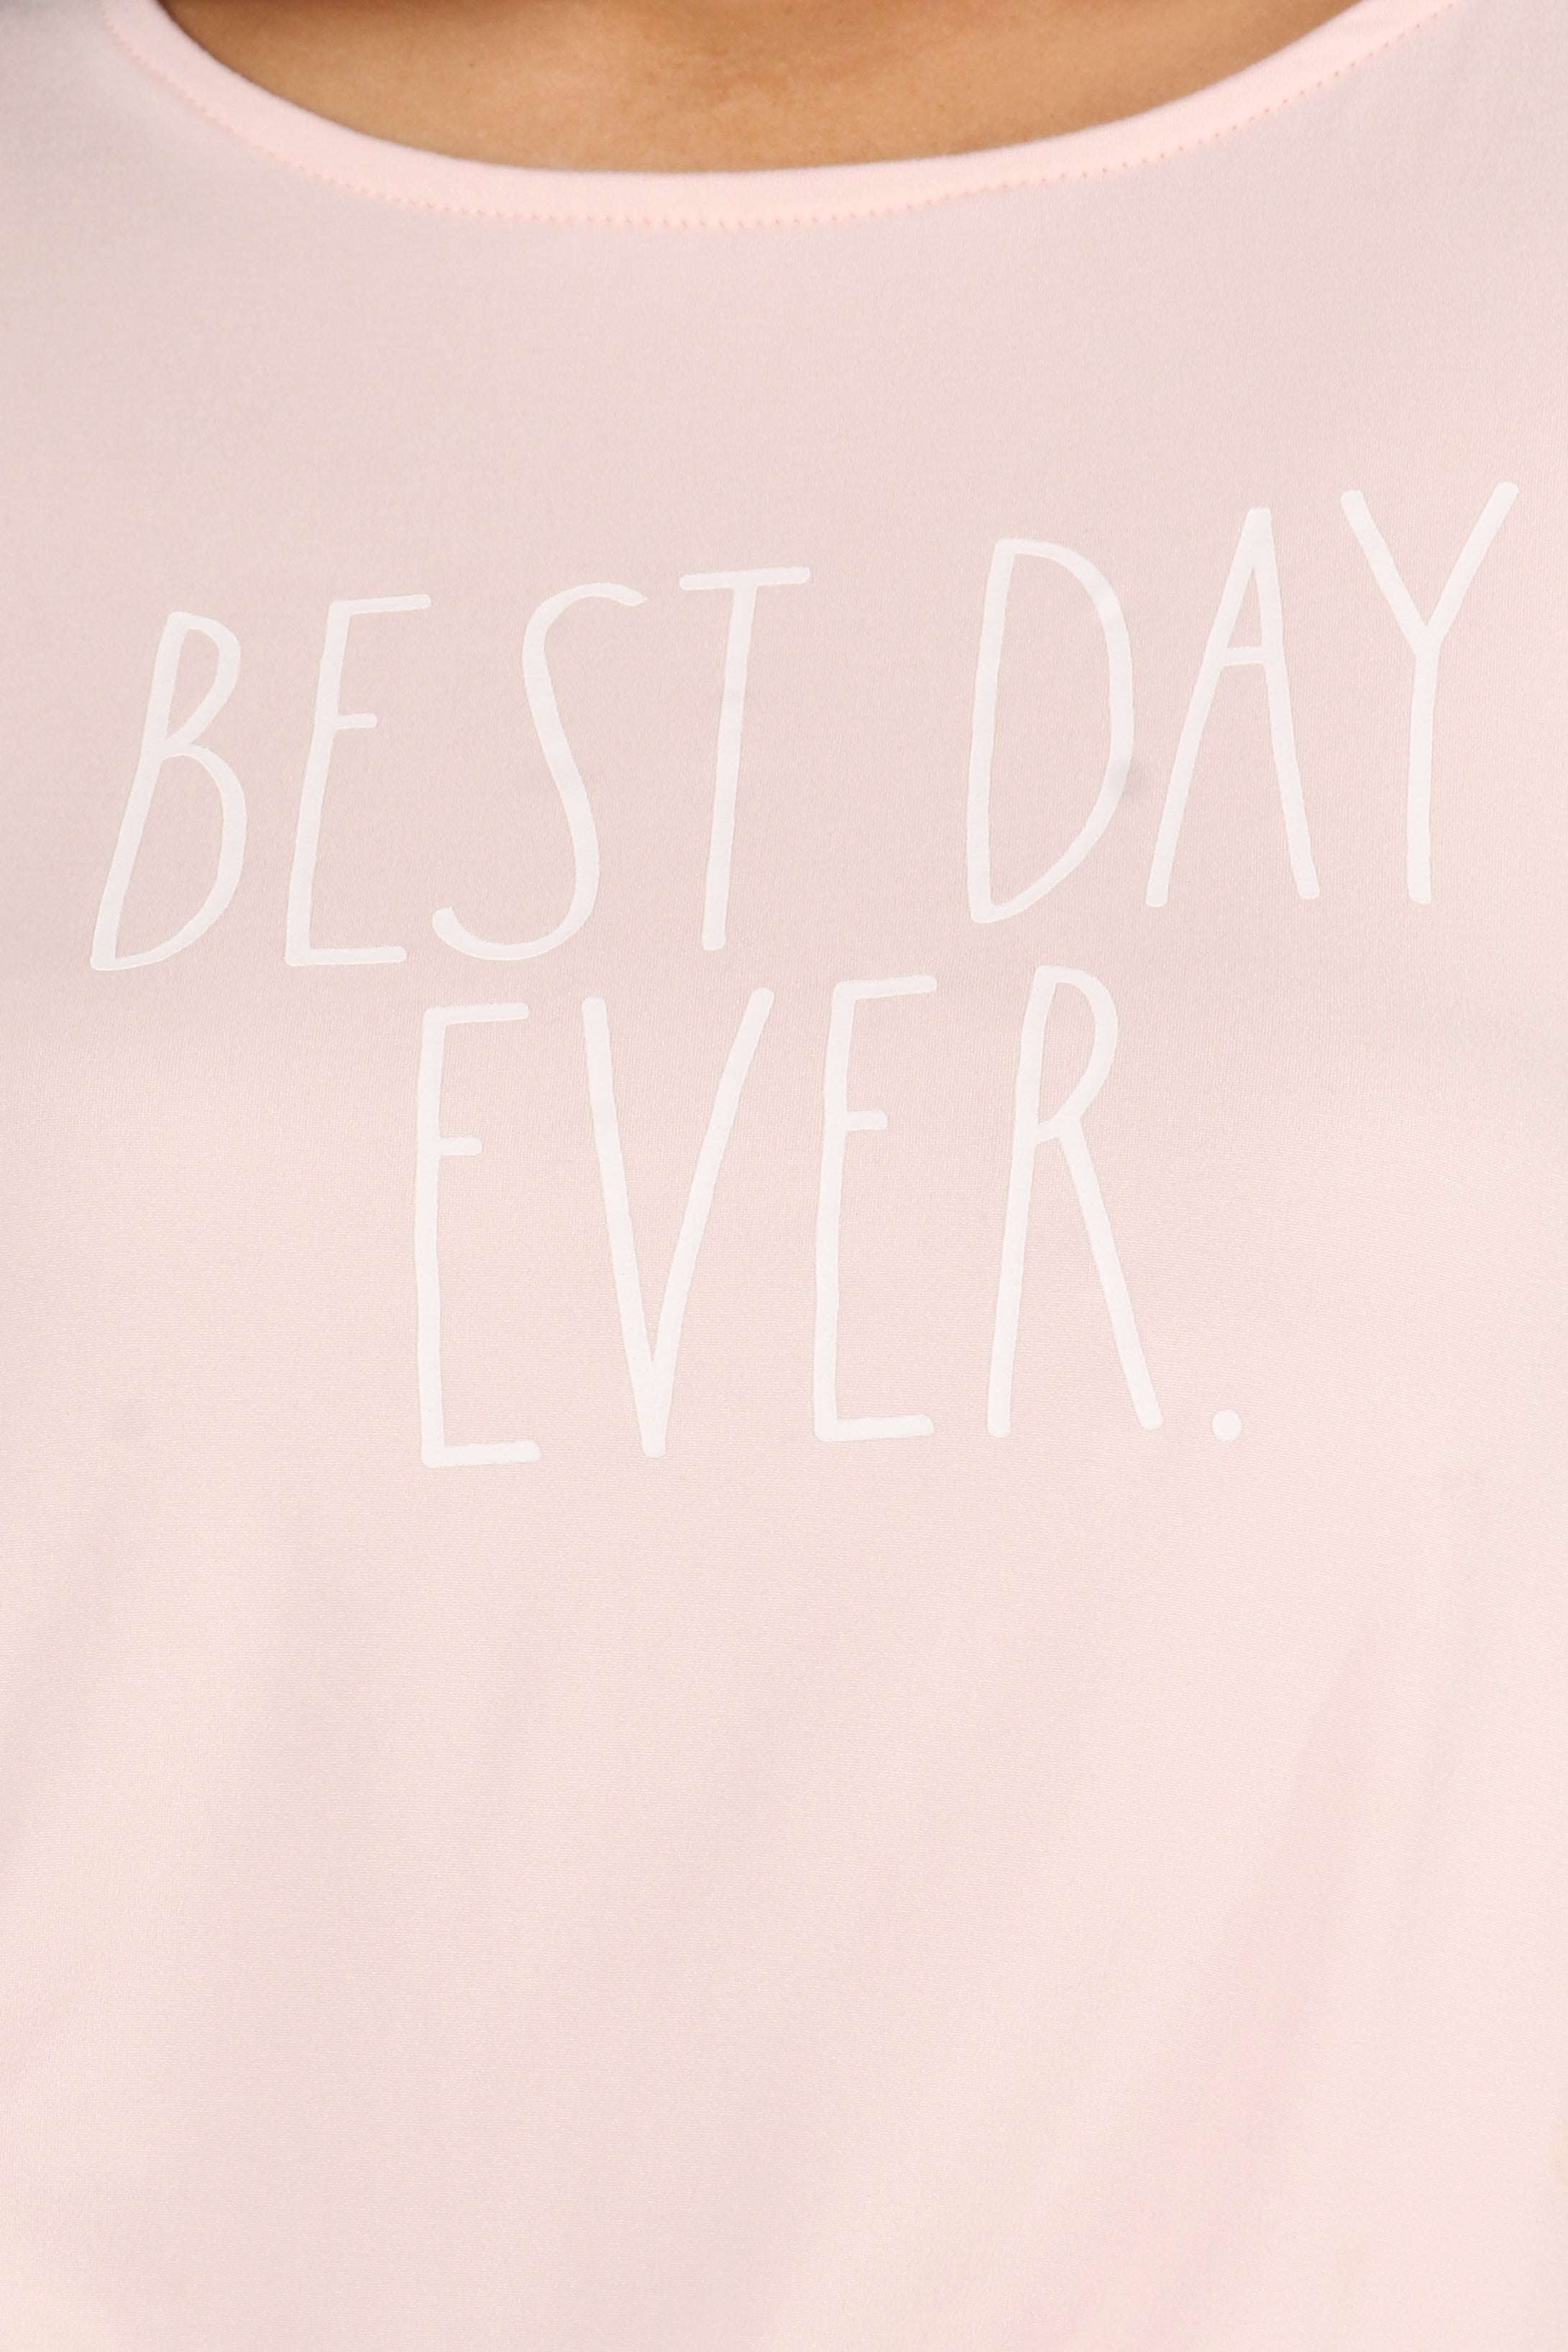 Women's "BEST DAY EVER" Tank and Short Pajama Set - Rae Dunn Wear